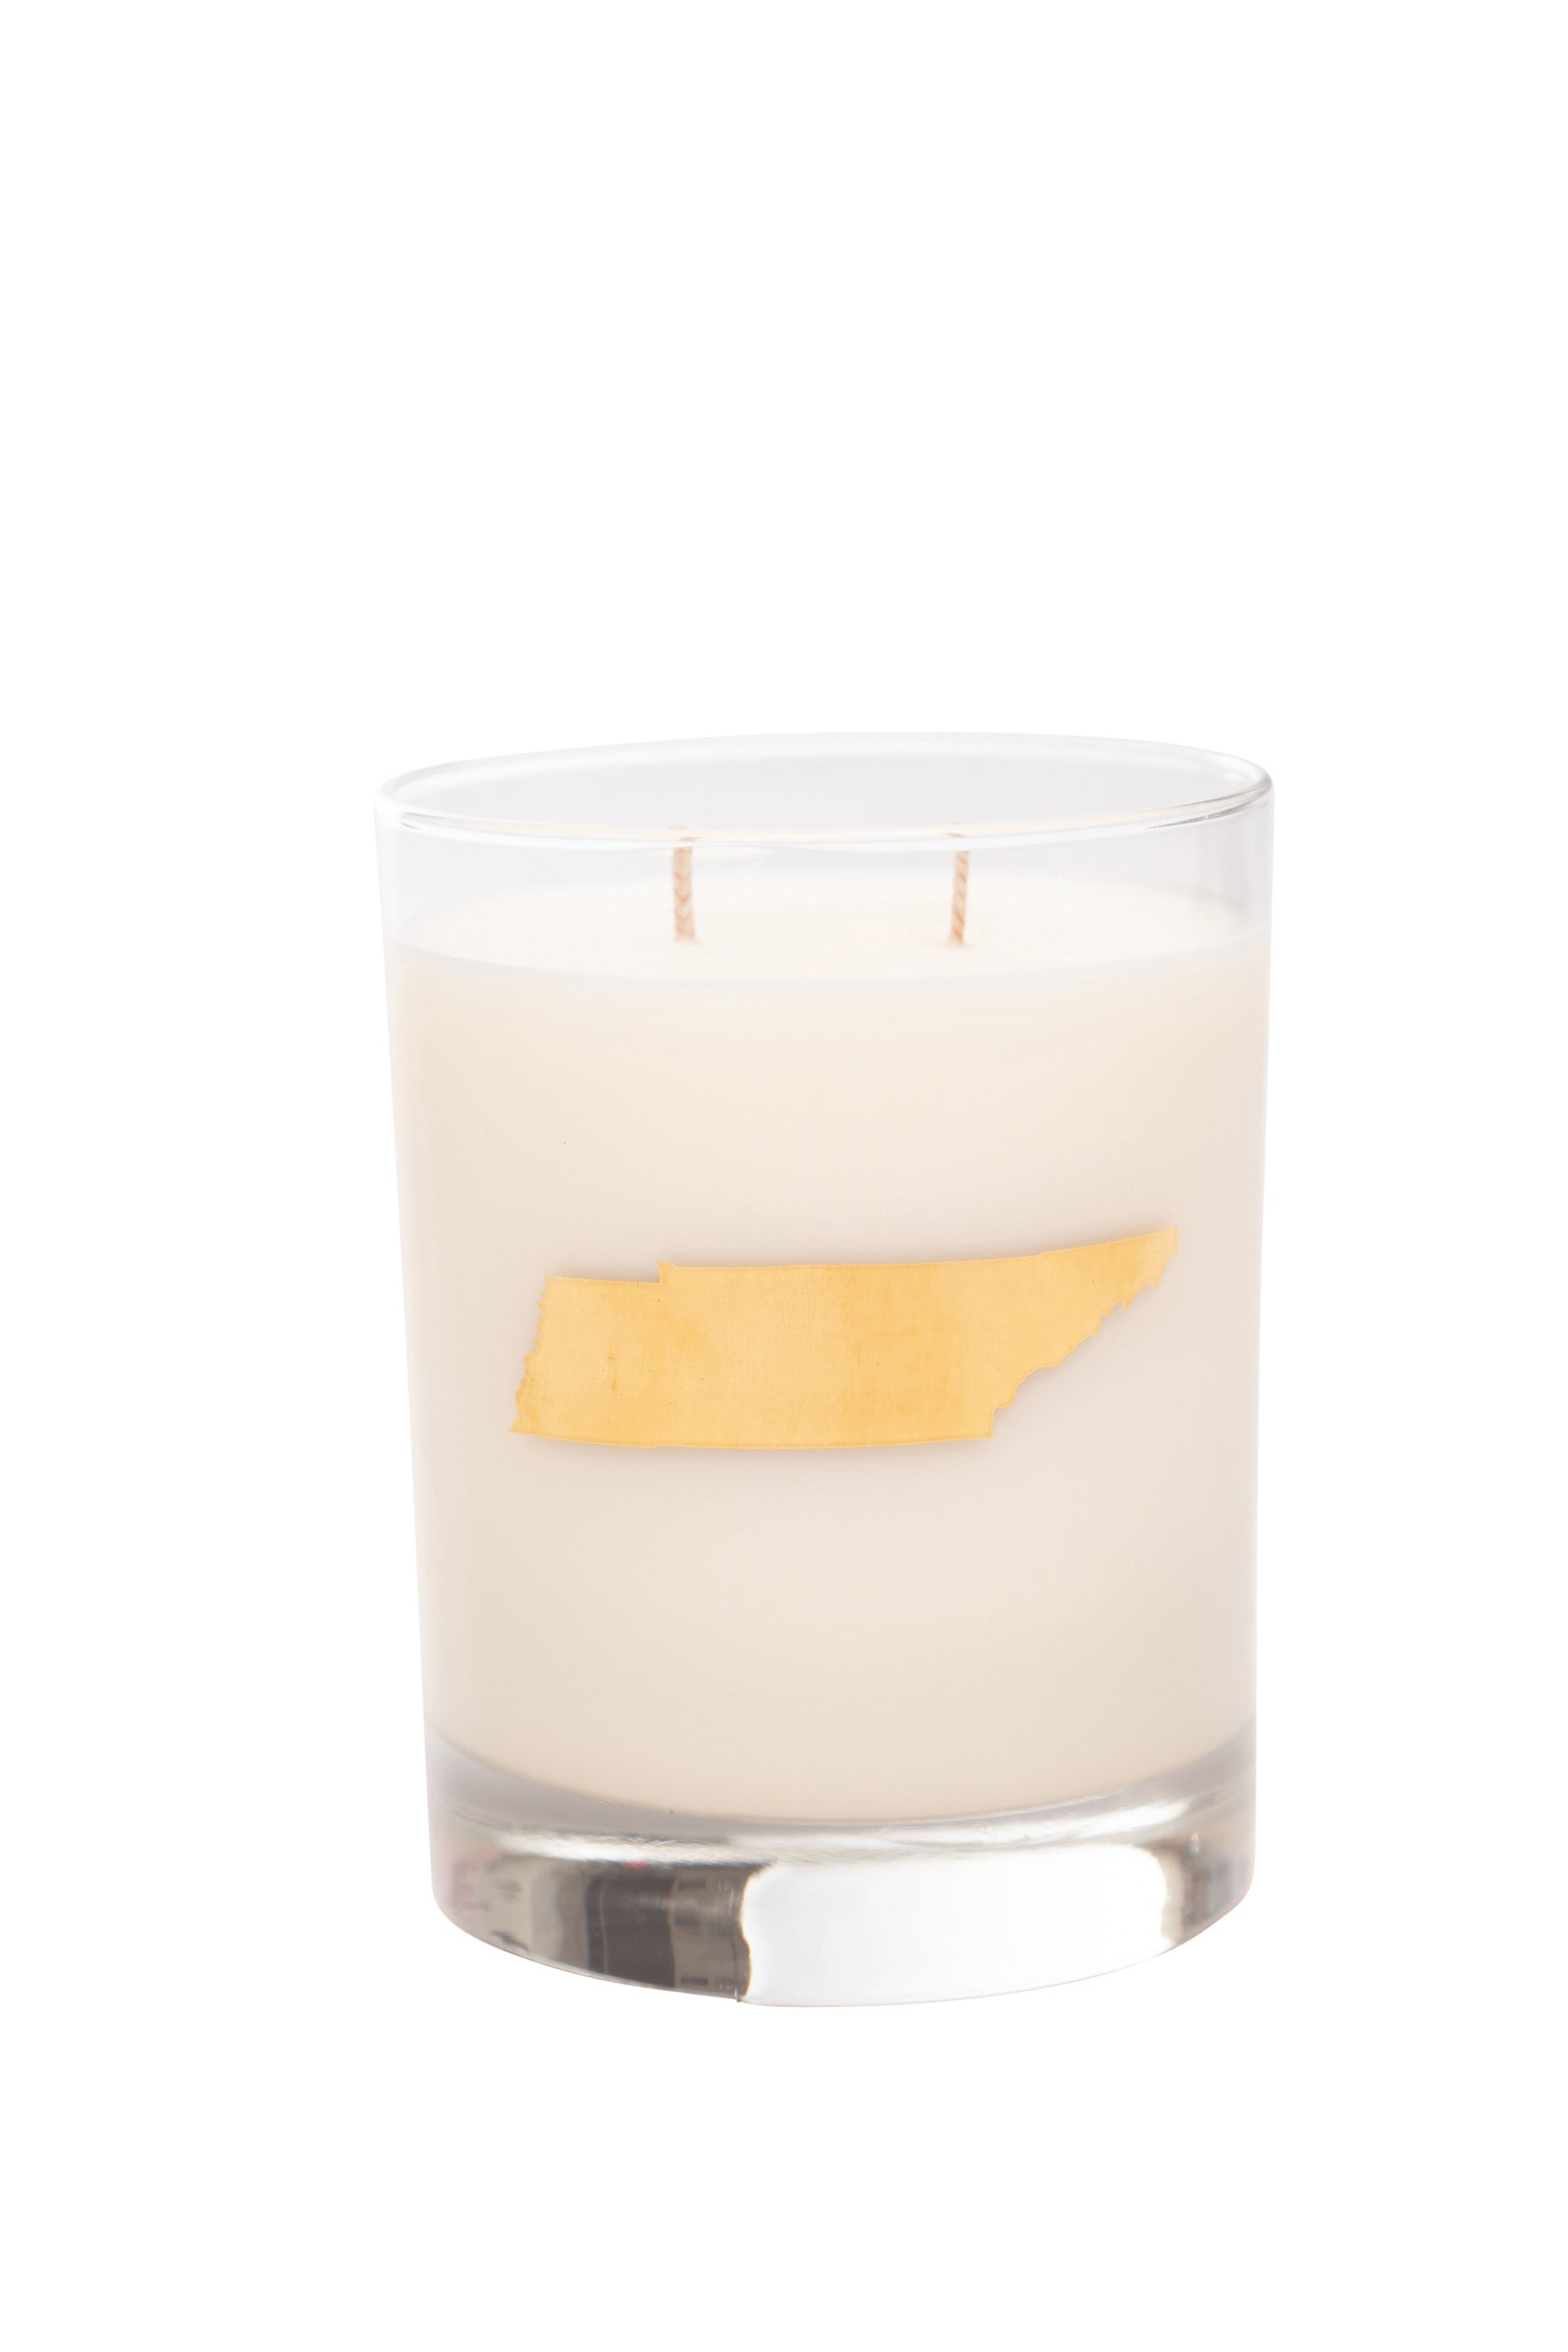 Tennessee Two Wick Cocktail Collection Candle